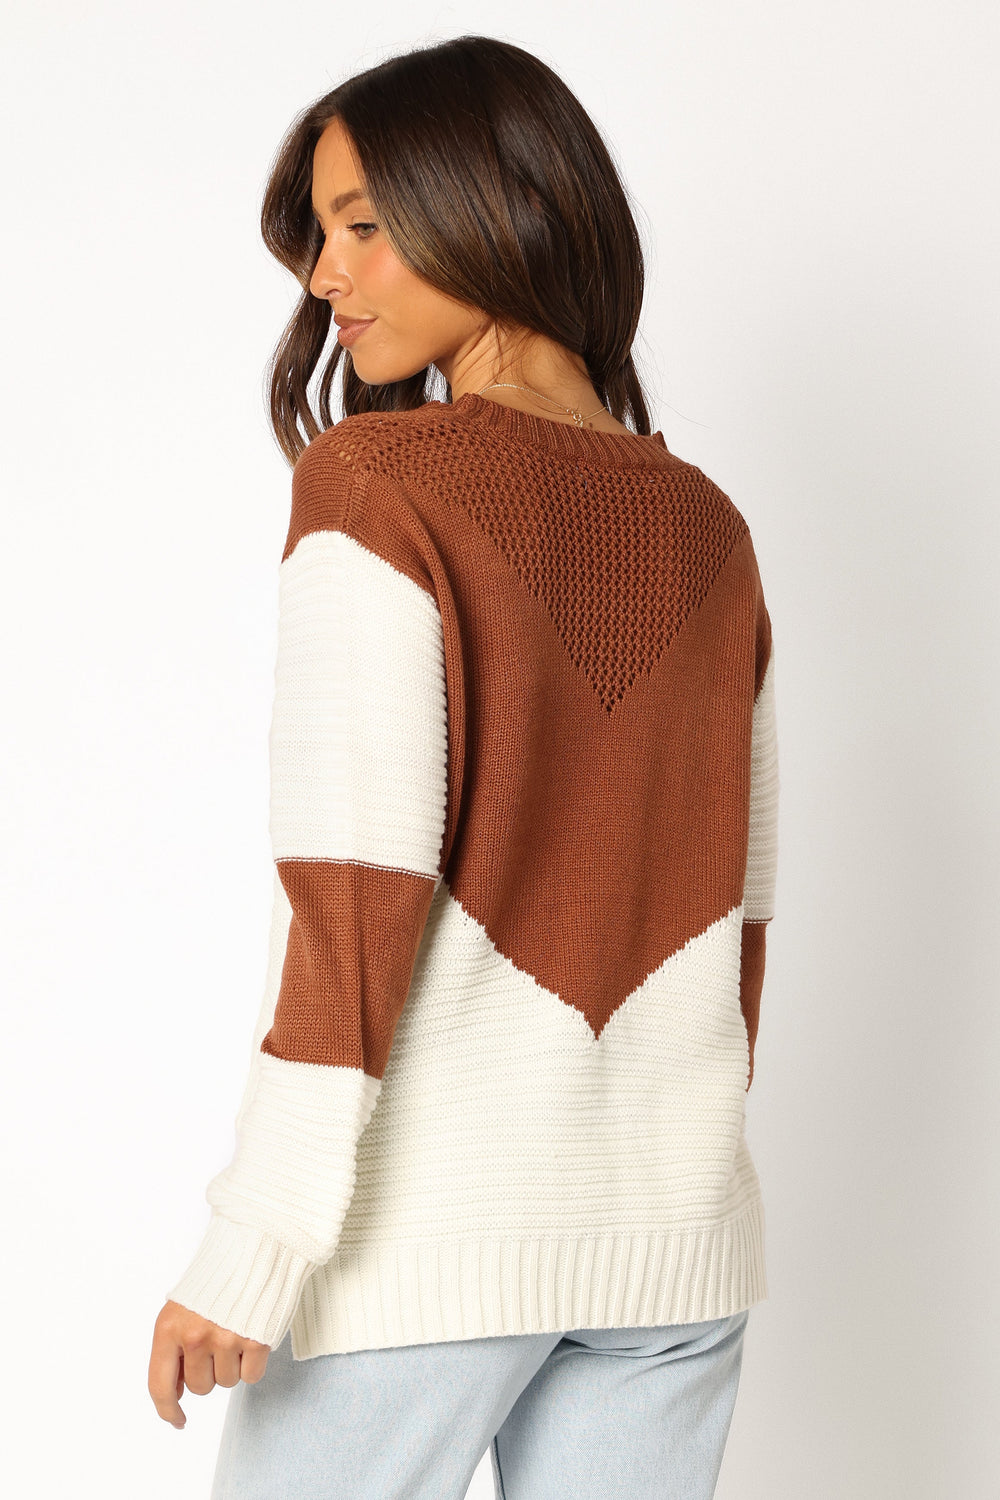 Petal and Pup USA KNITWEAR Lauryn Knit Sweater - Ivory/Camel